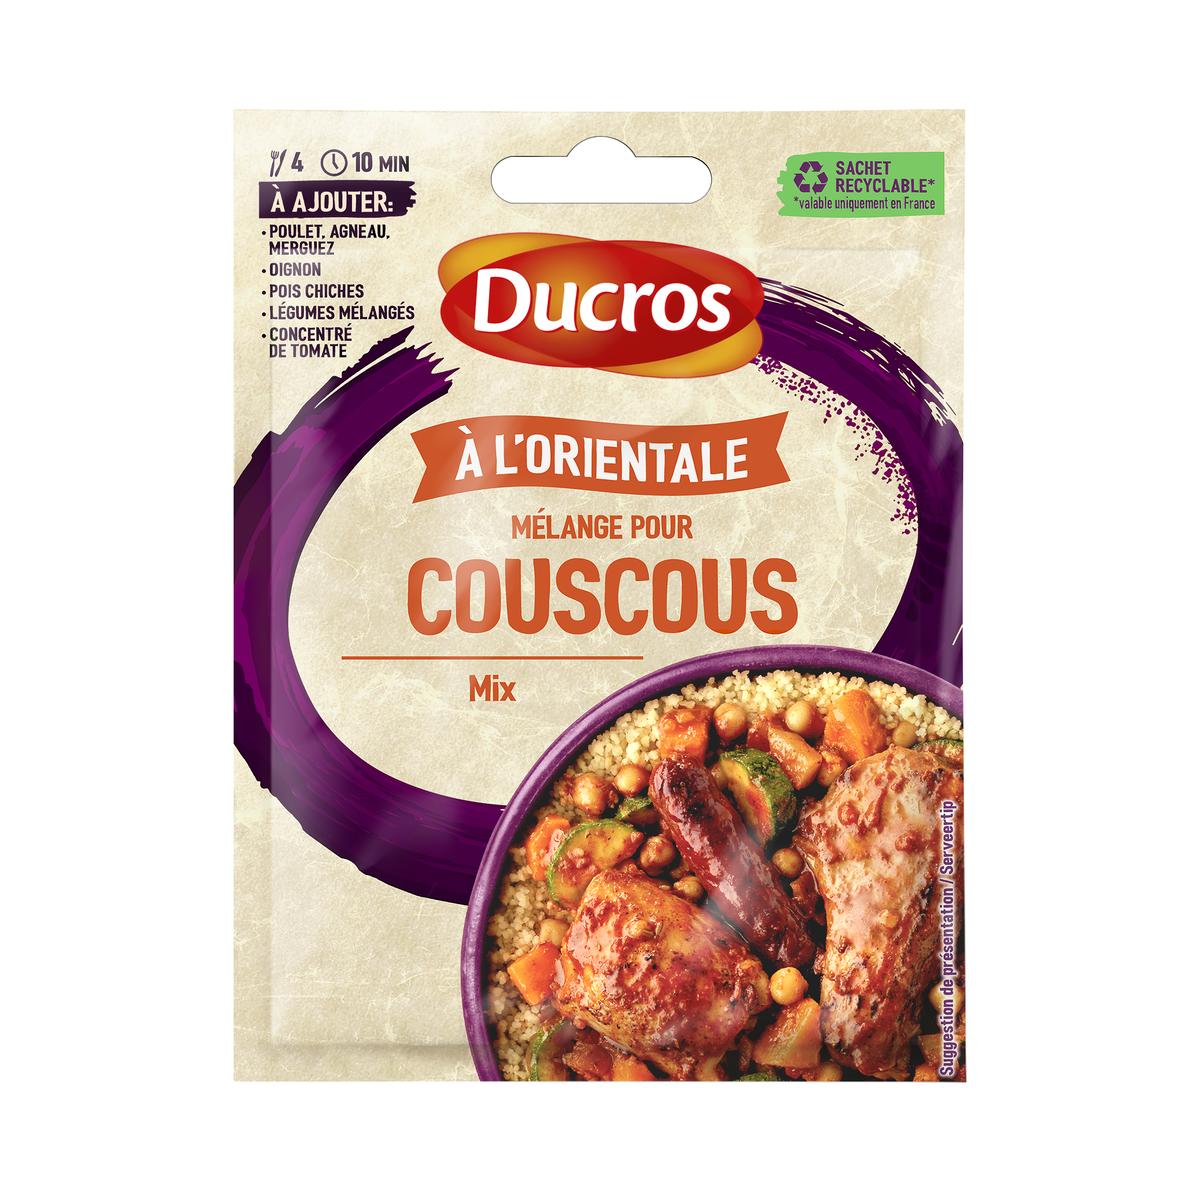 https://my-french-grocery.com/wp-content/uploads/2023/05/Ducros-Epices-Couscous.jpg